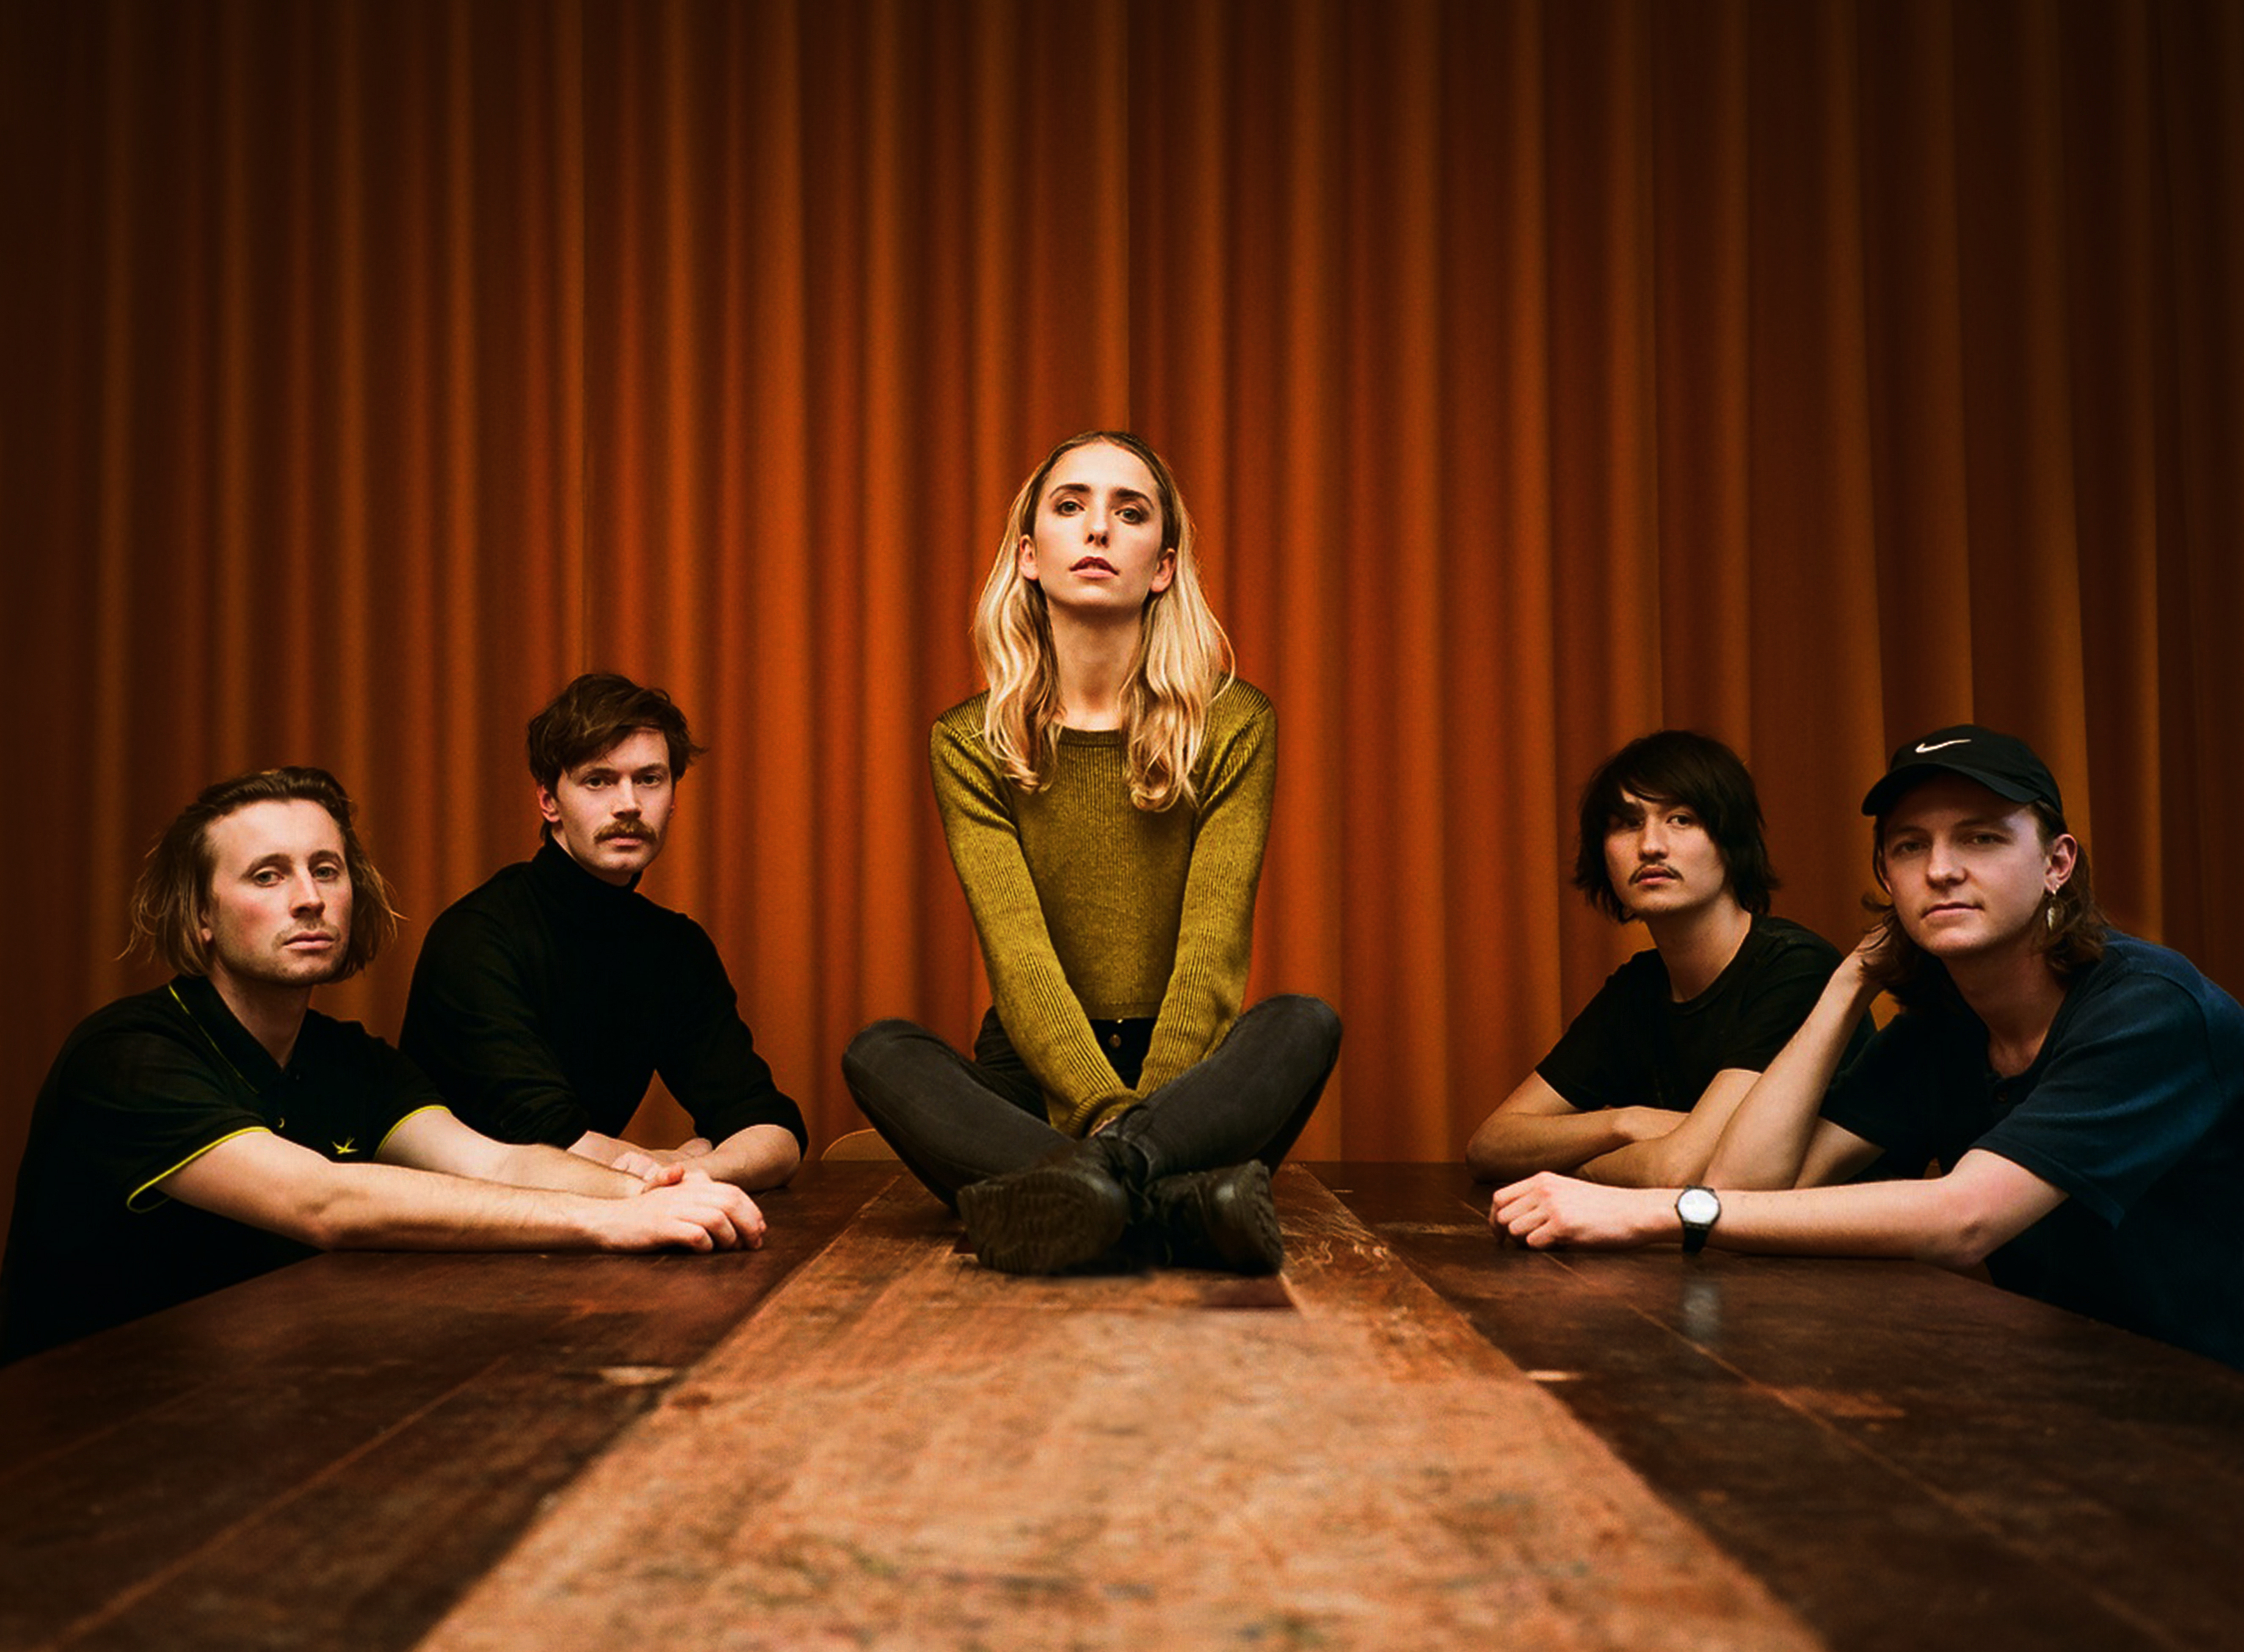 Pumarosa: One To Watch for 2016